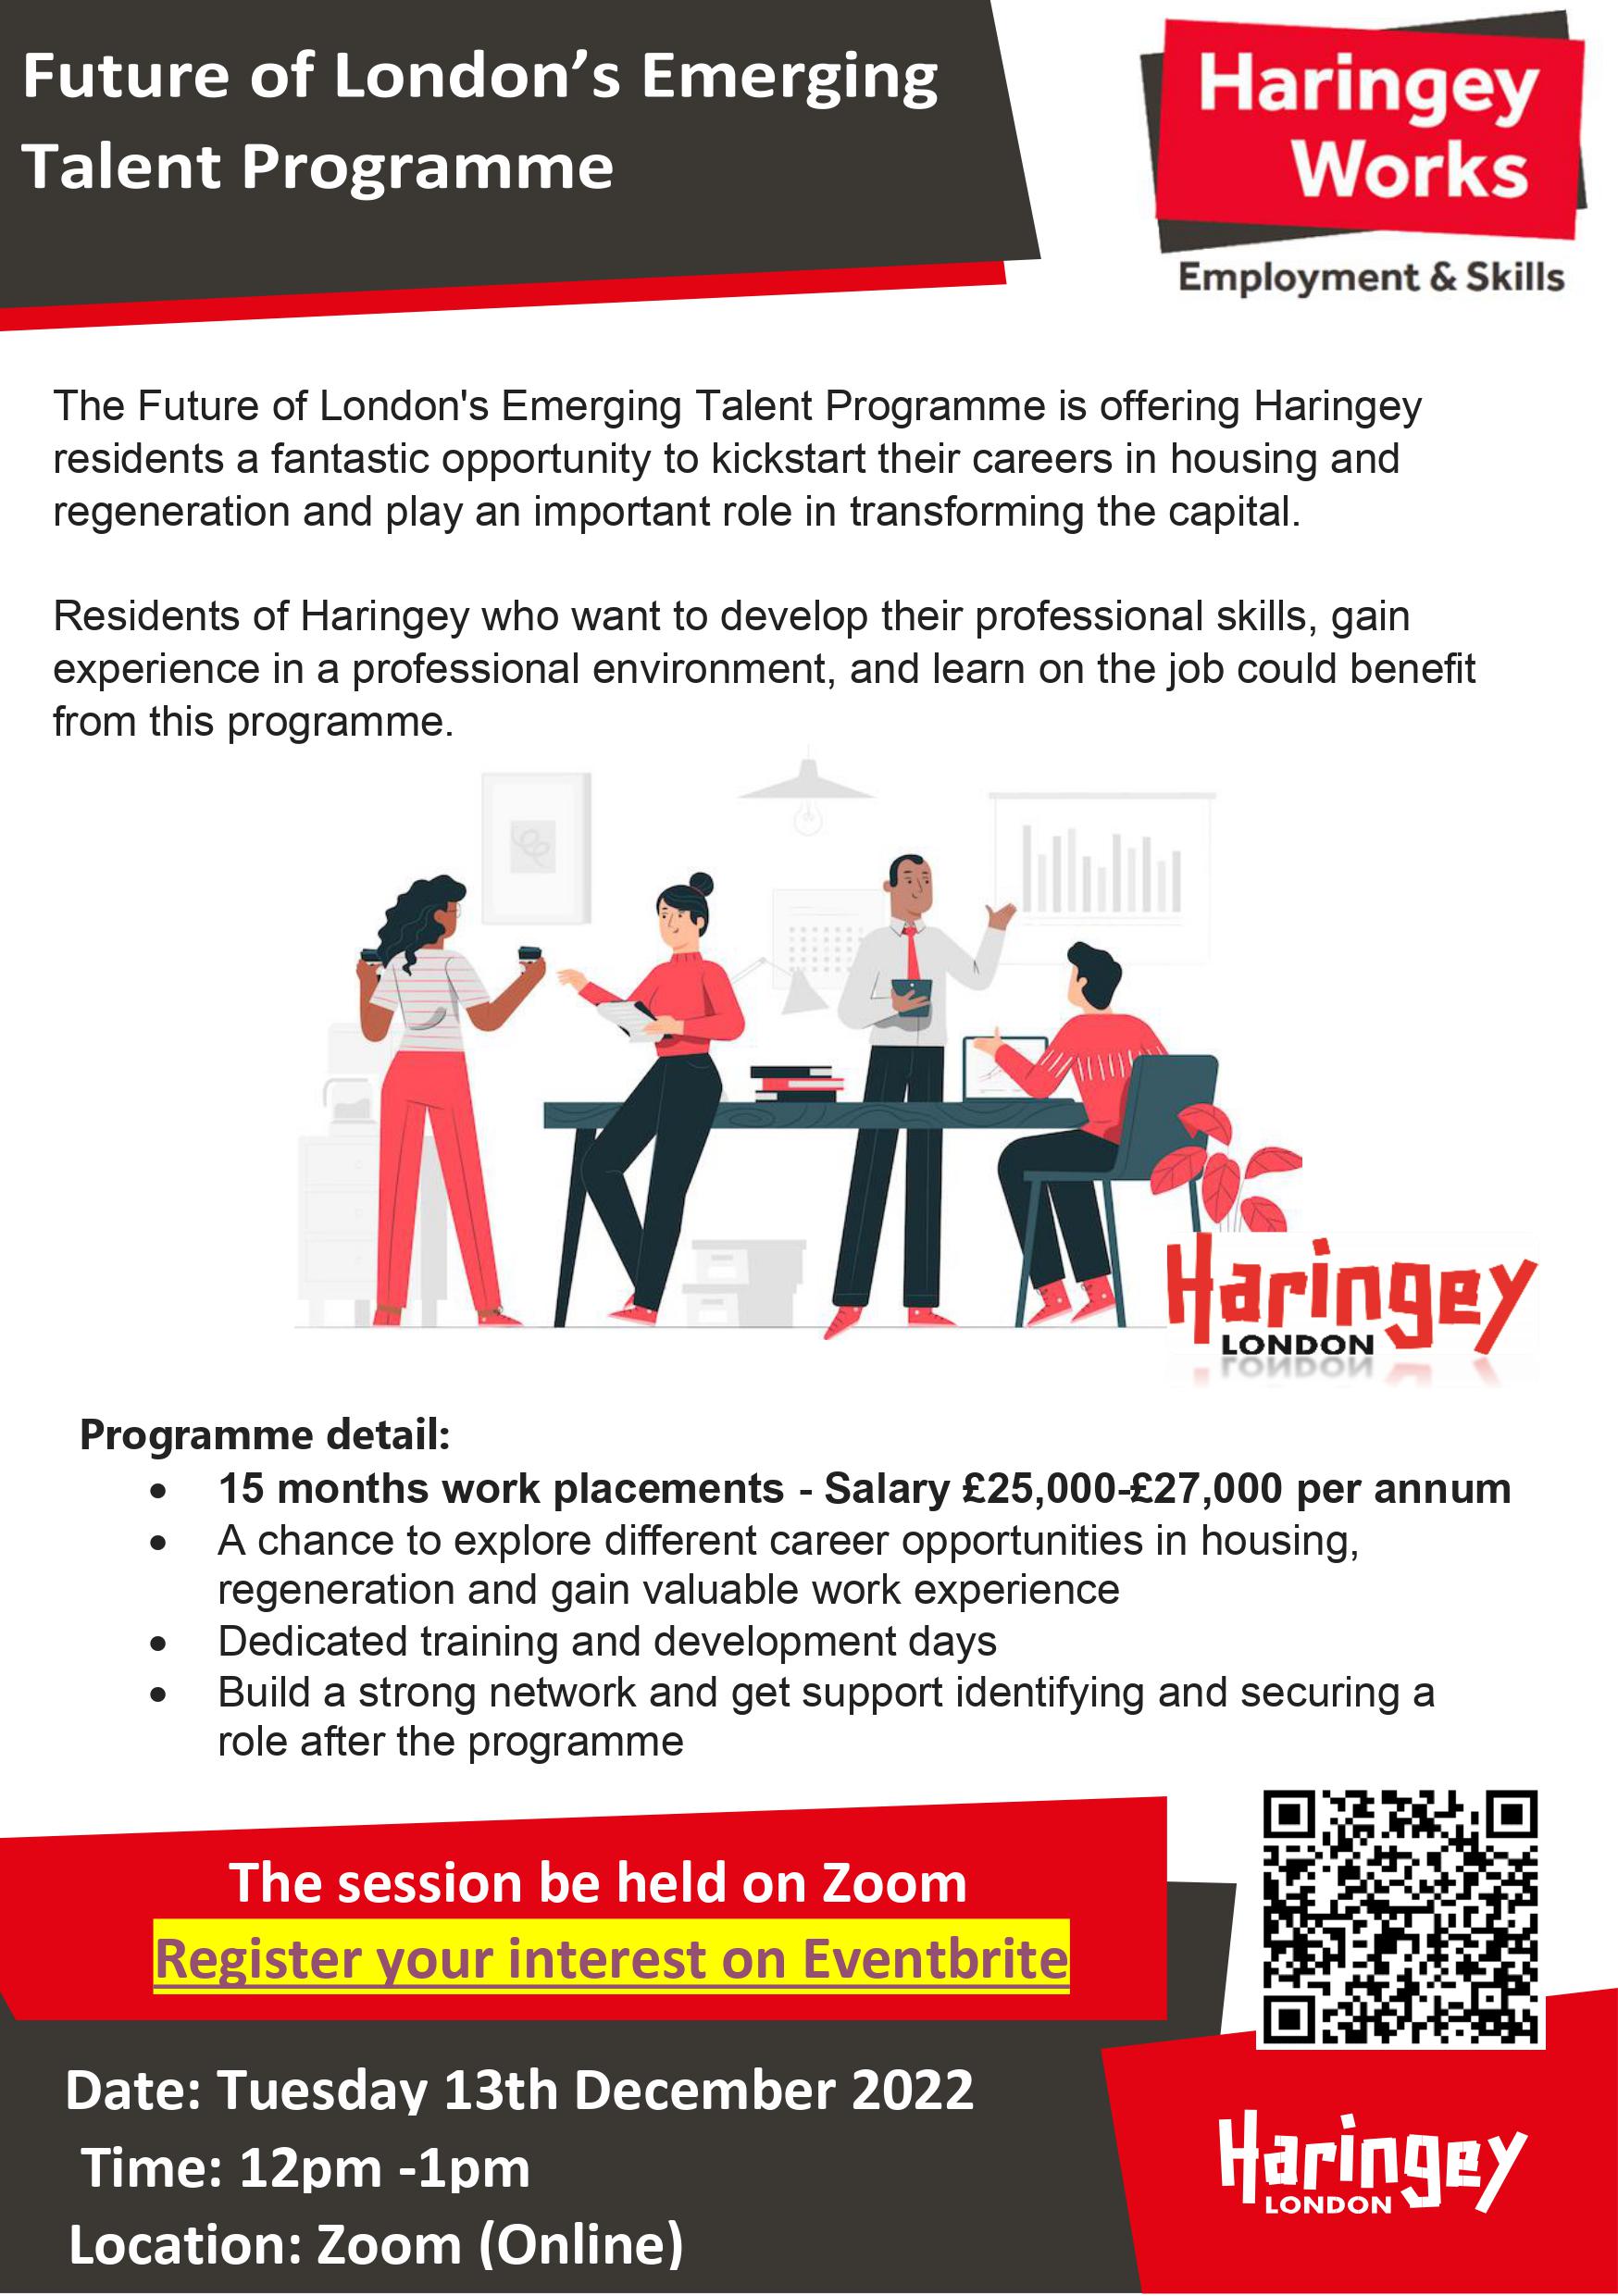 Future of London Emerging Talent Programme Image